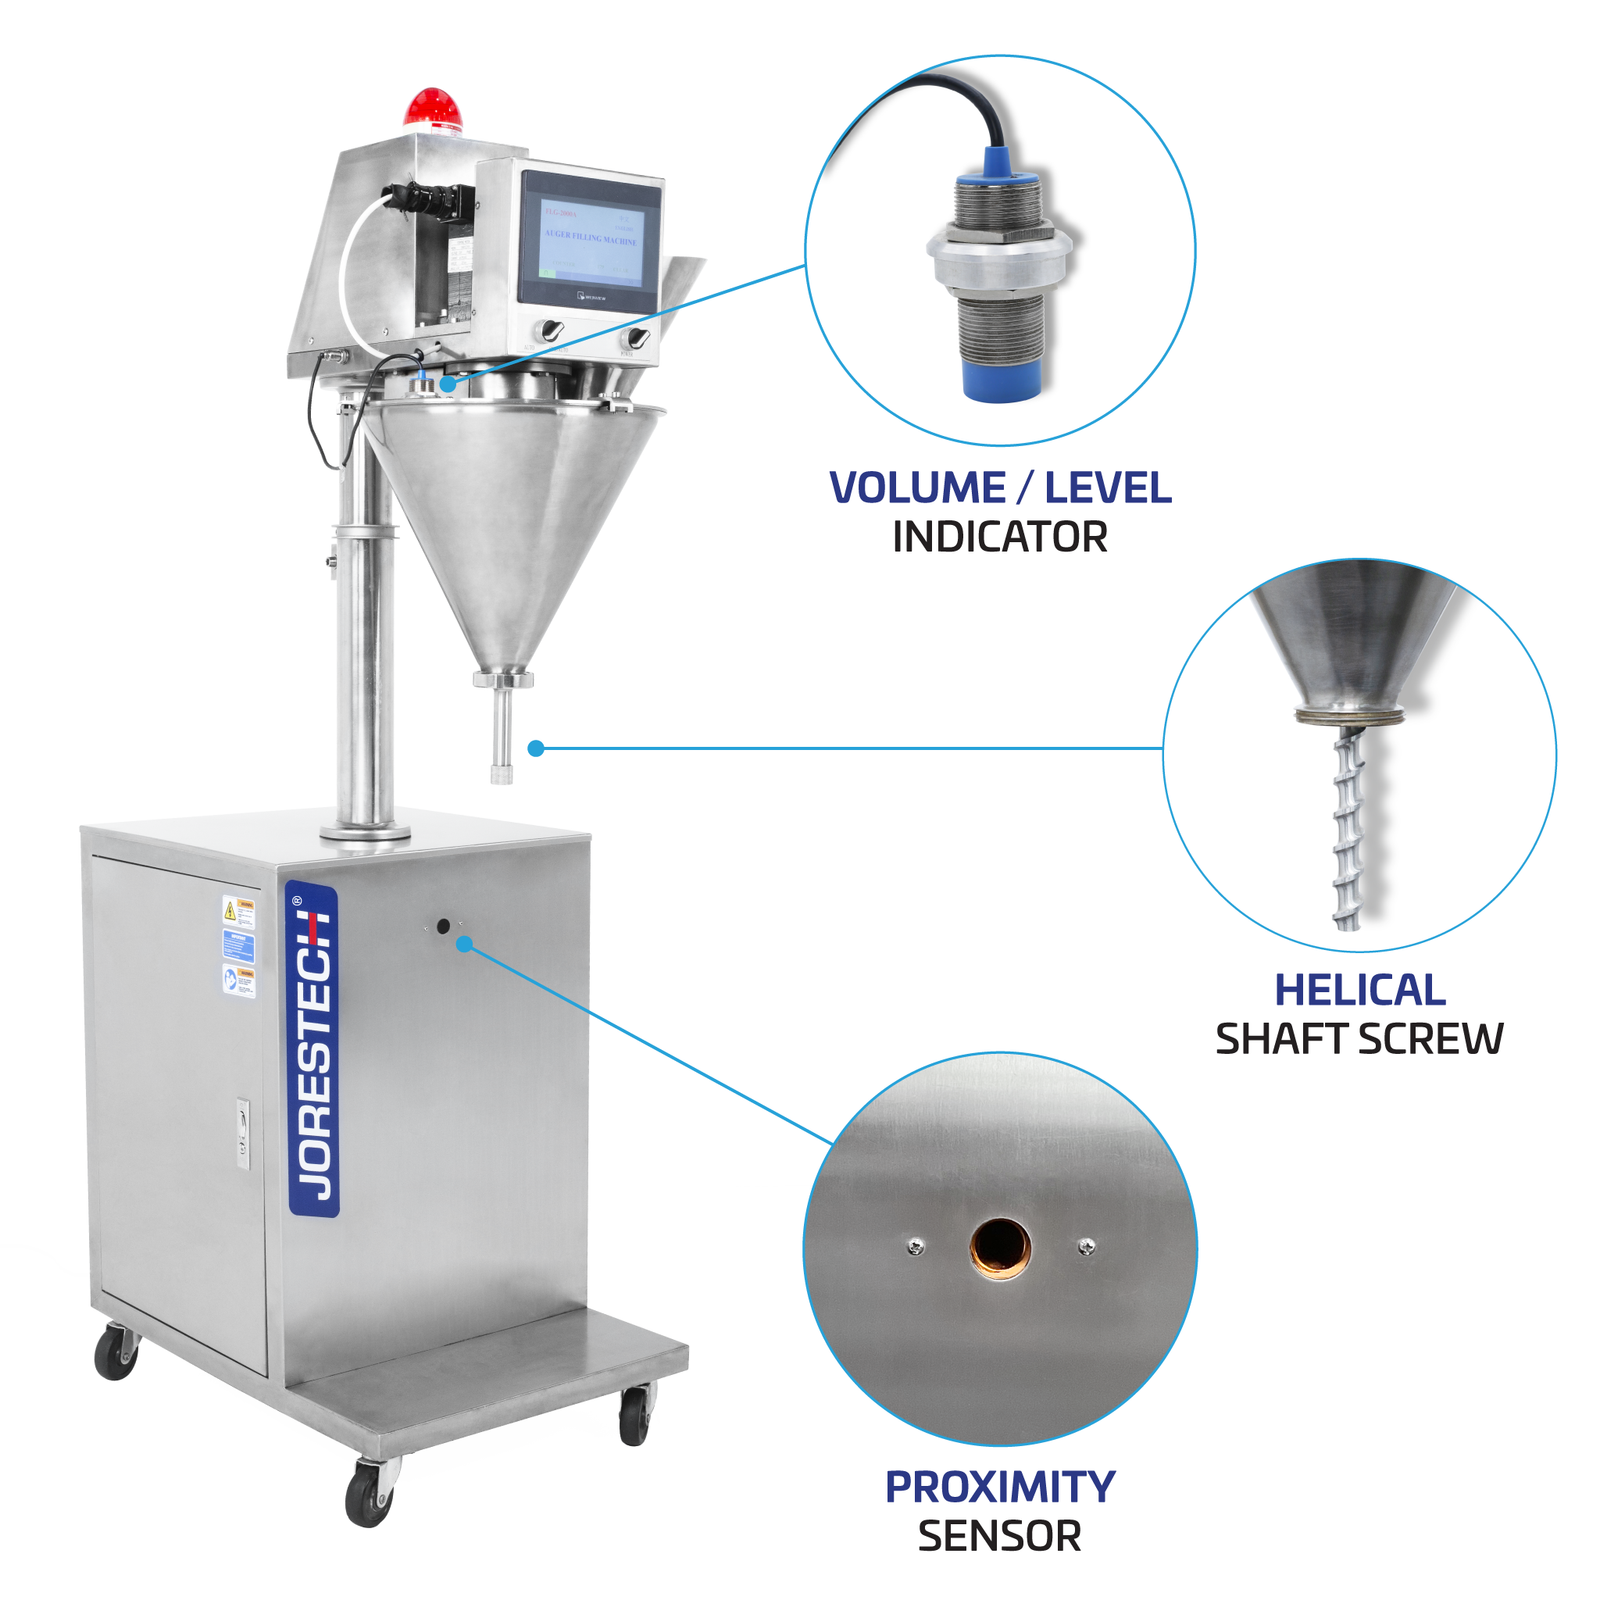 Infographic of an auger-type stainless steel powder dispensing and filling machine shown in a diagonal view over a white background. There are three highlighted features which are: “volume level indicator”, “helical shaft screw”, and “proximity sensor”.